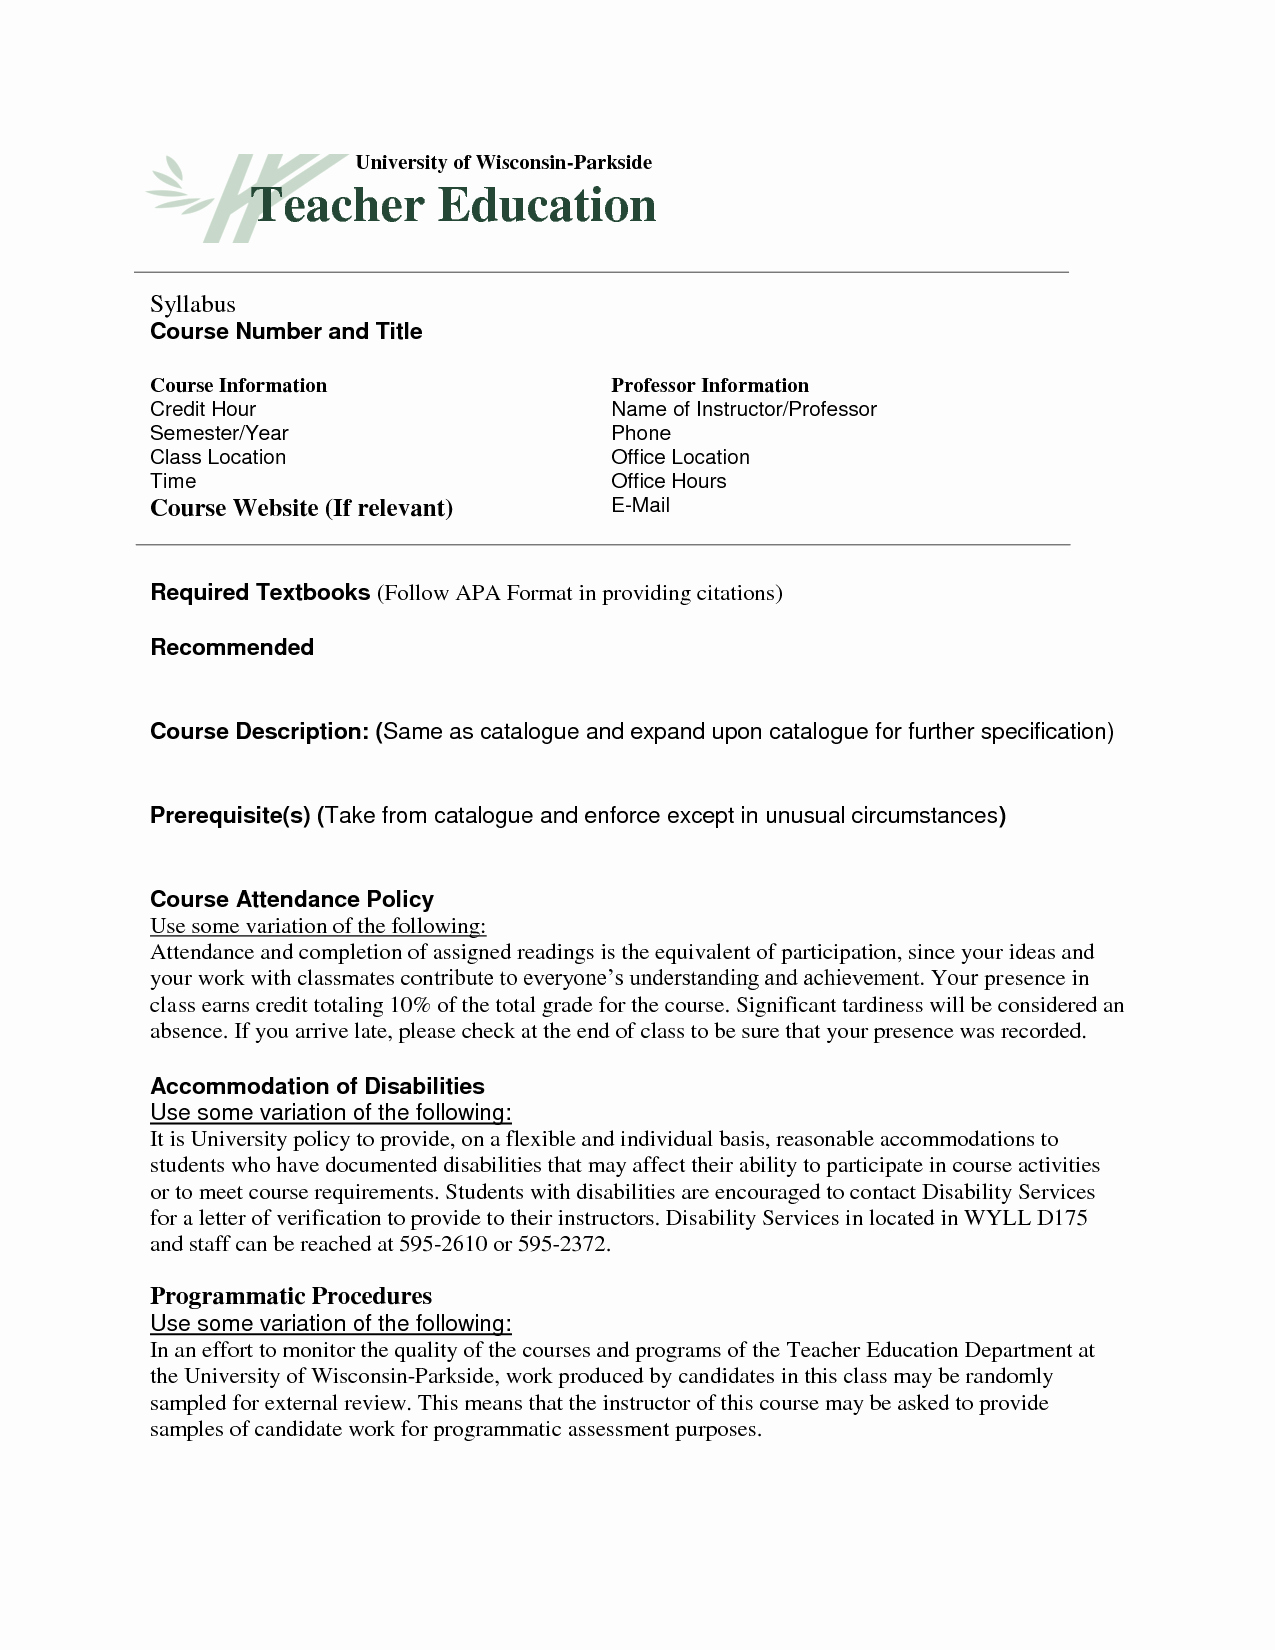 Course Syllabus Template for Teachers Lovely Course Syllabus Template Gallery Template Design Ideas